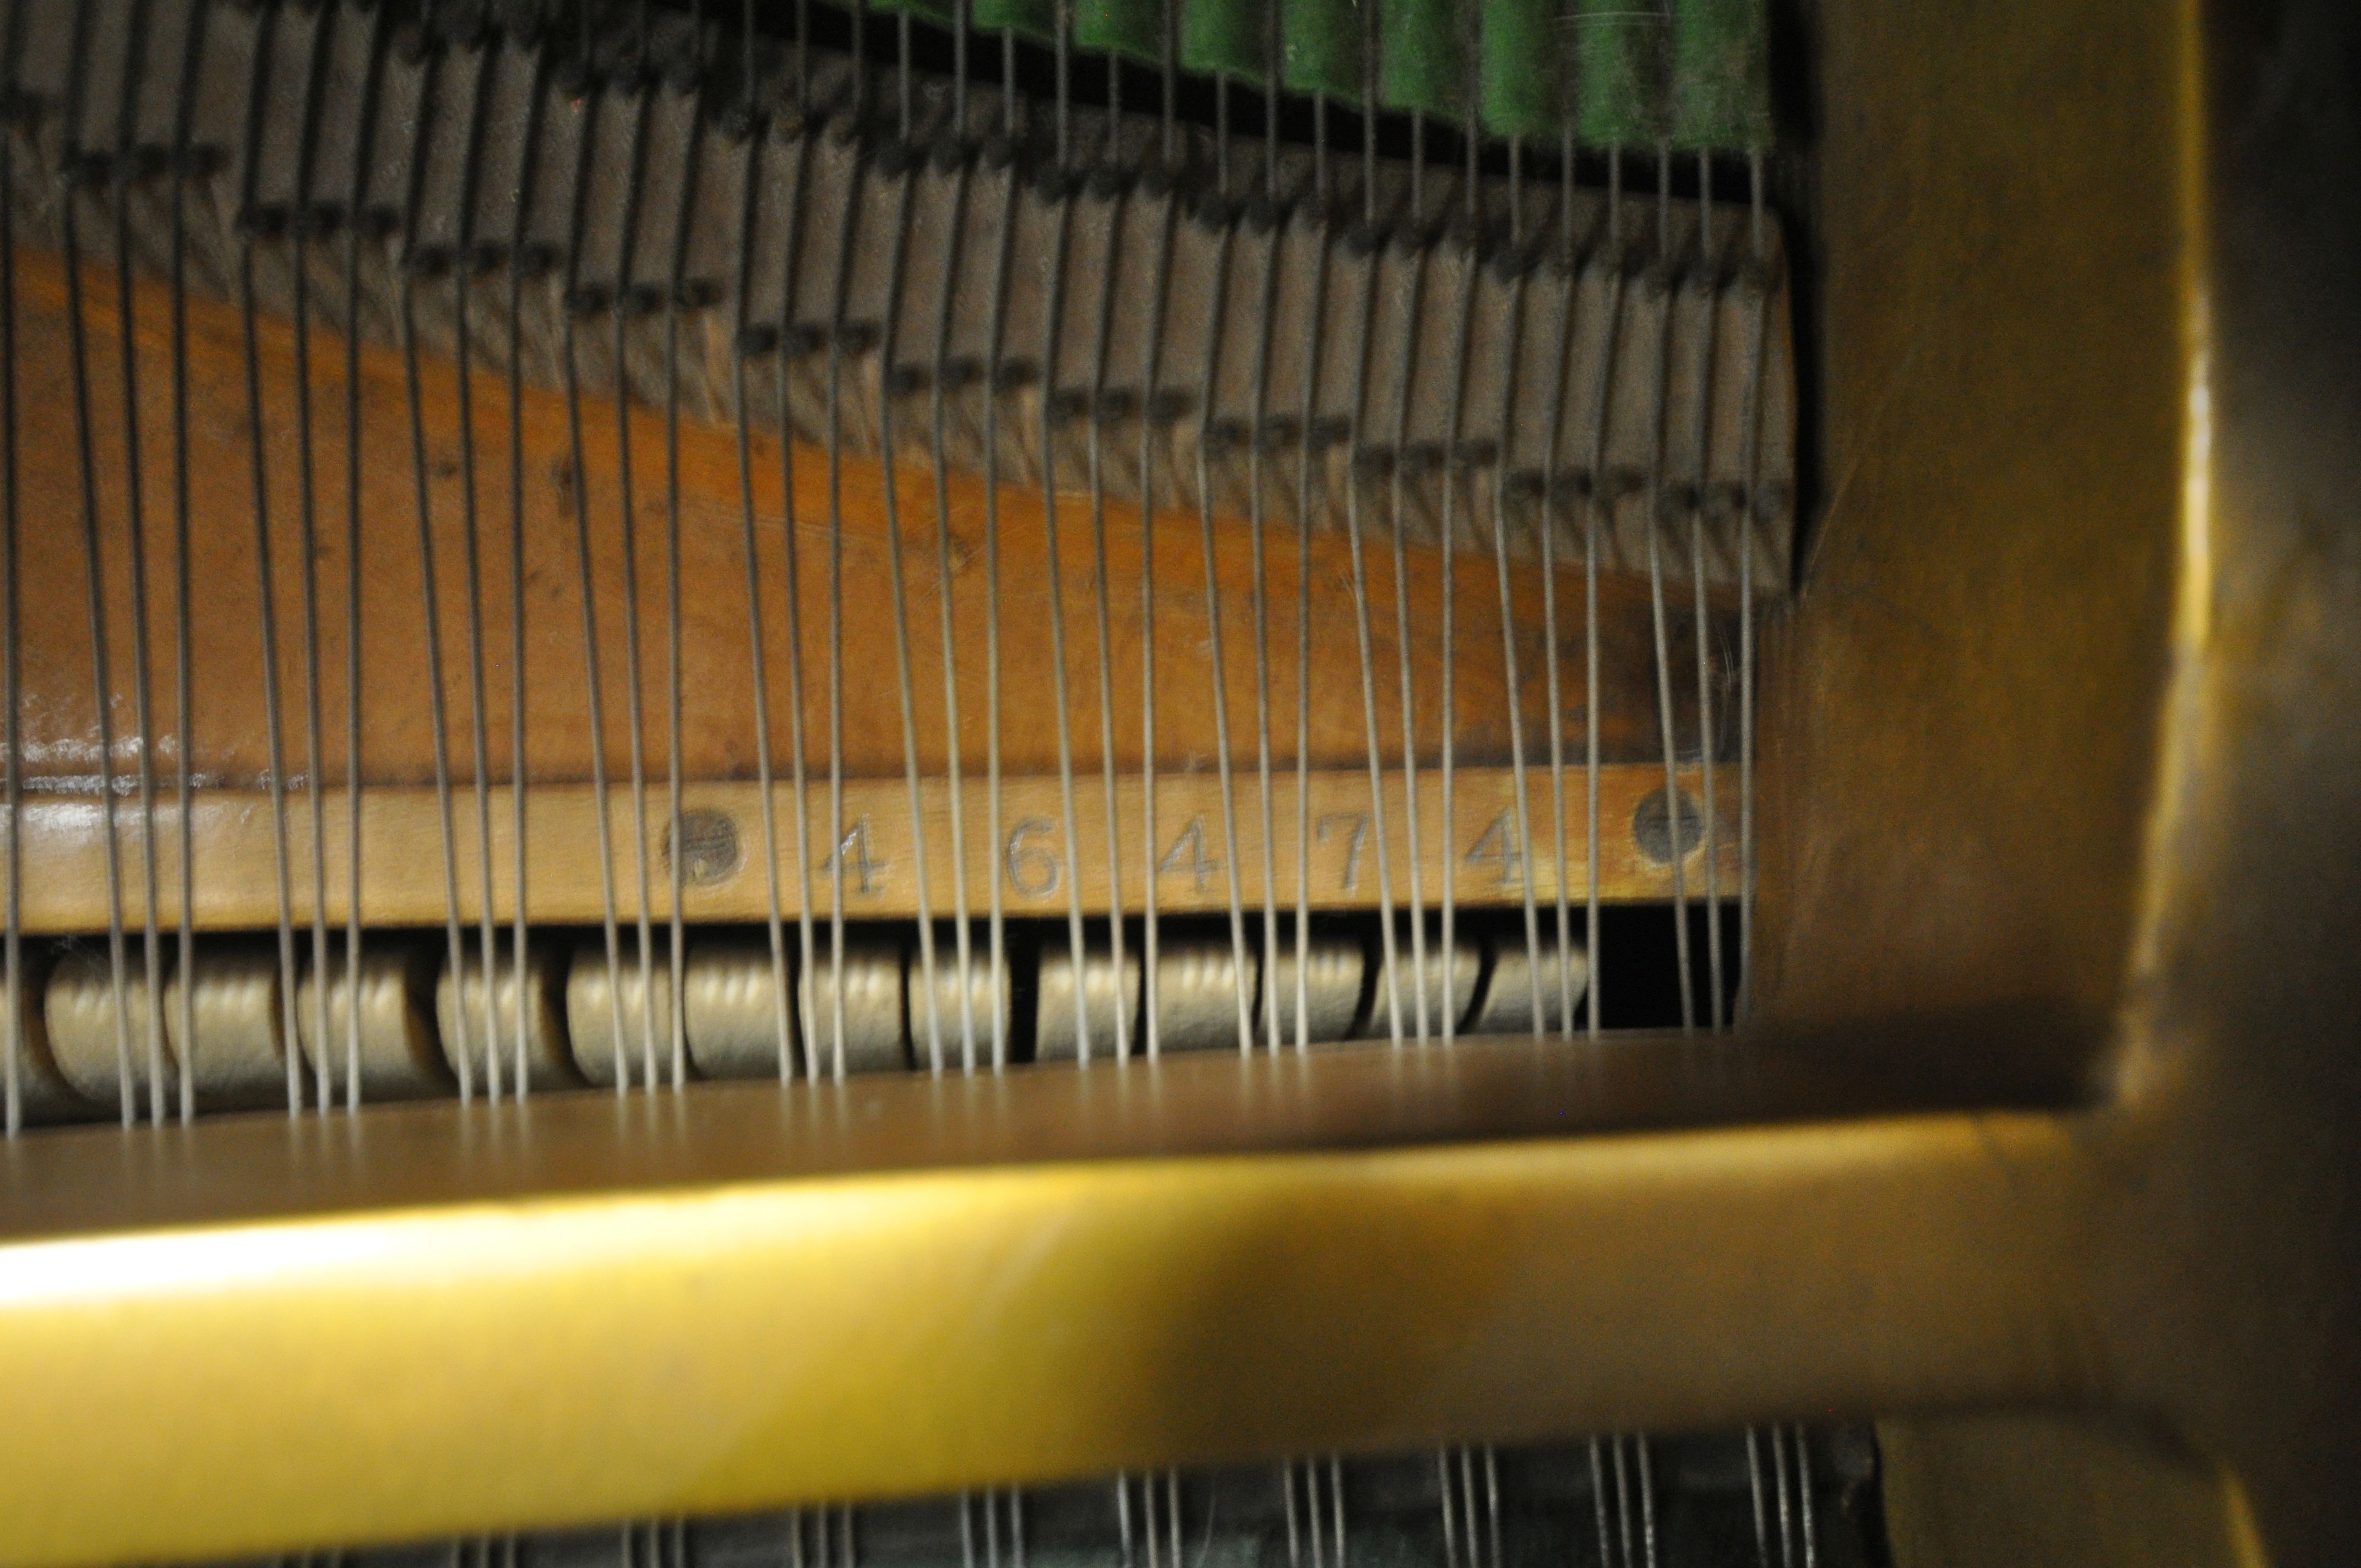 A CHALLEN MAHOGANY 4FT 7 INCH BABY GRAND PIANO, serial number 46474, bone keys, on cabriole legs, - Image 7 of 9